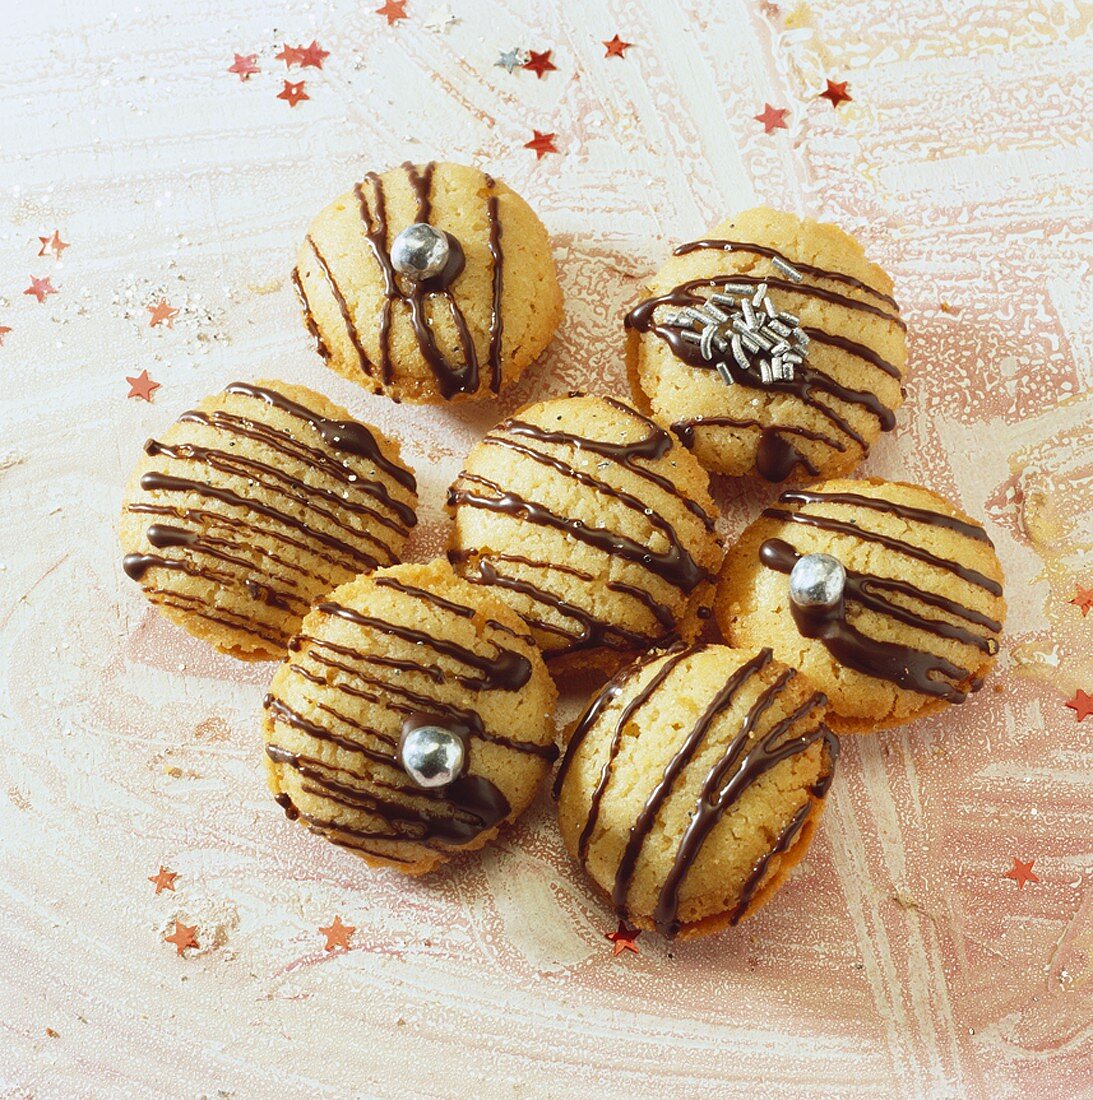 Biscuits with chocolate drizzle and silver pearls